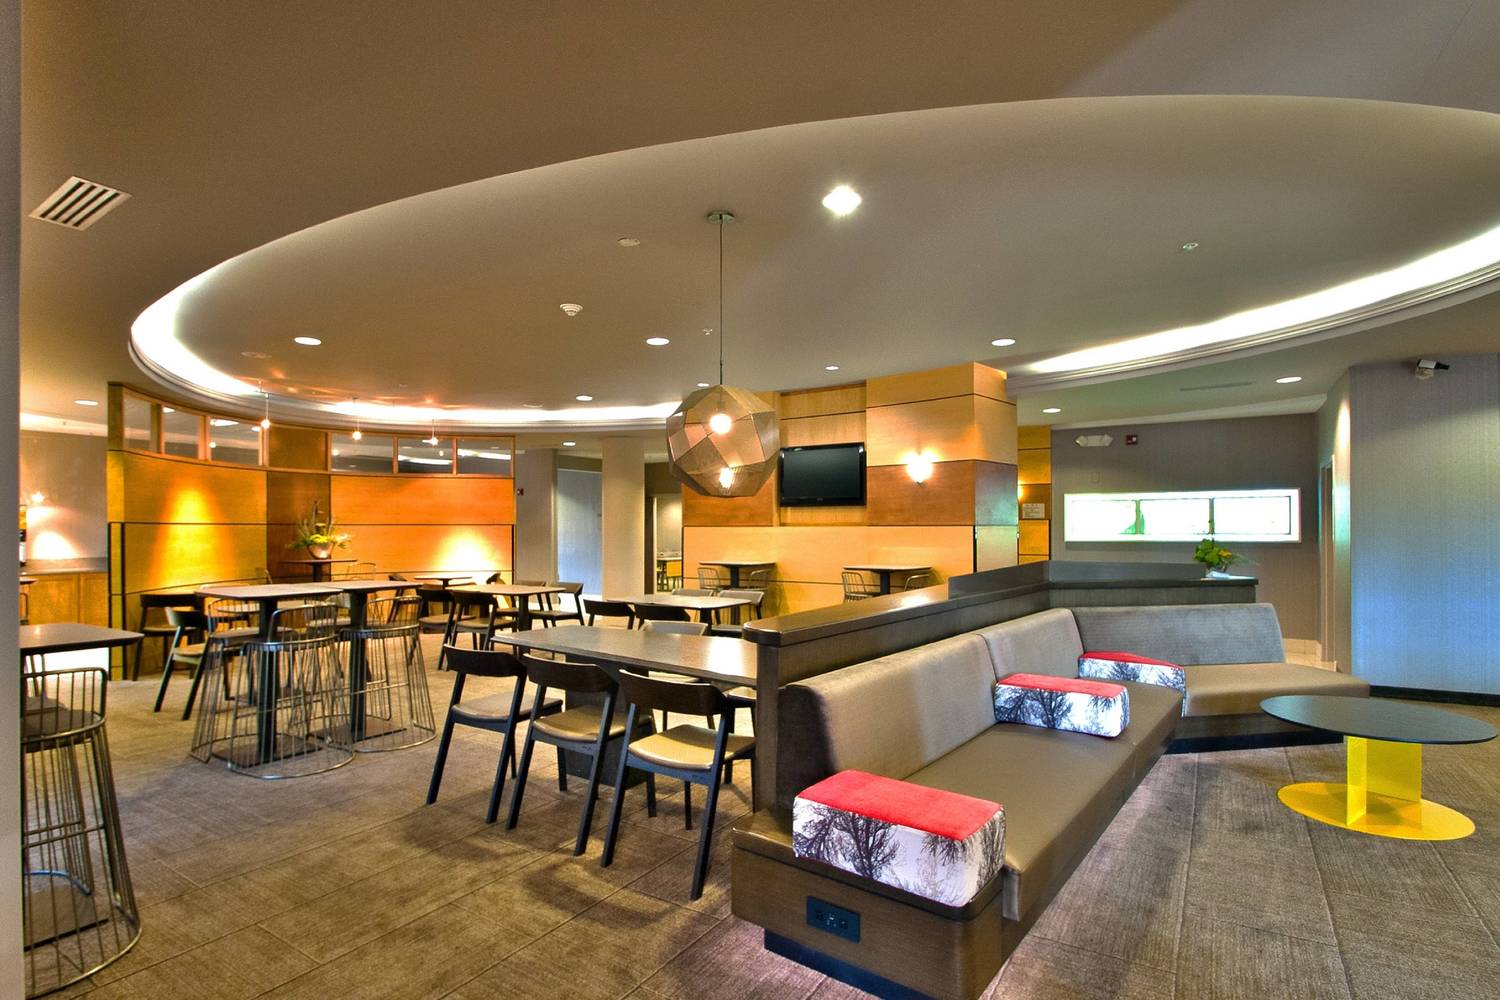 SpringHill Suites Louisville Airport, Louisville, KY Jobs | Hospitality Online